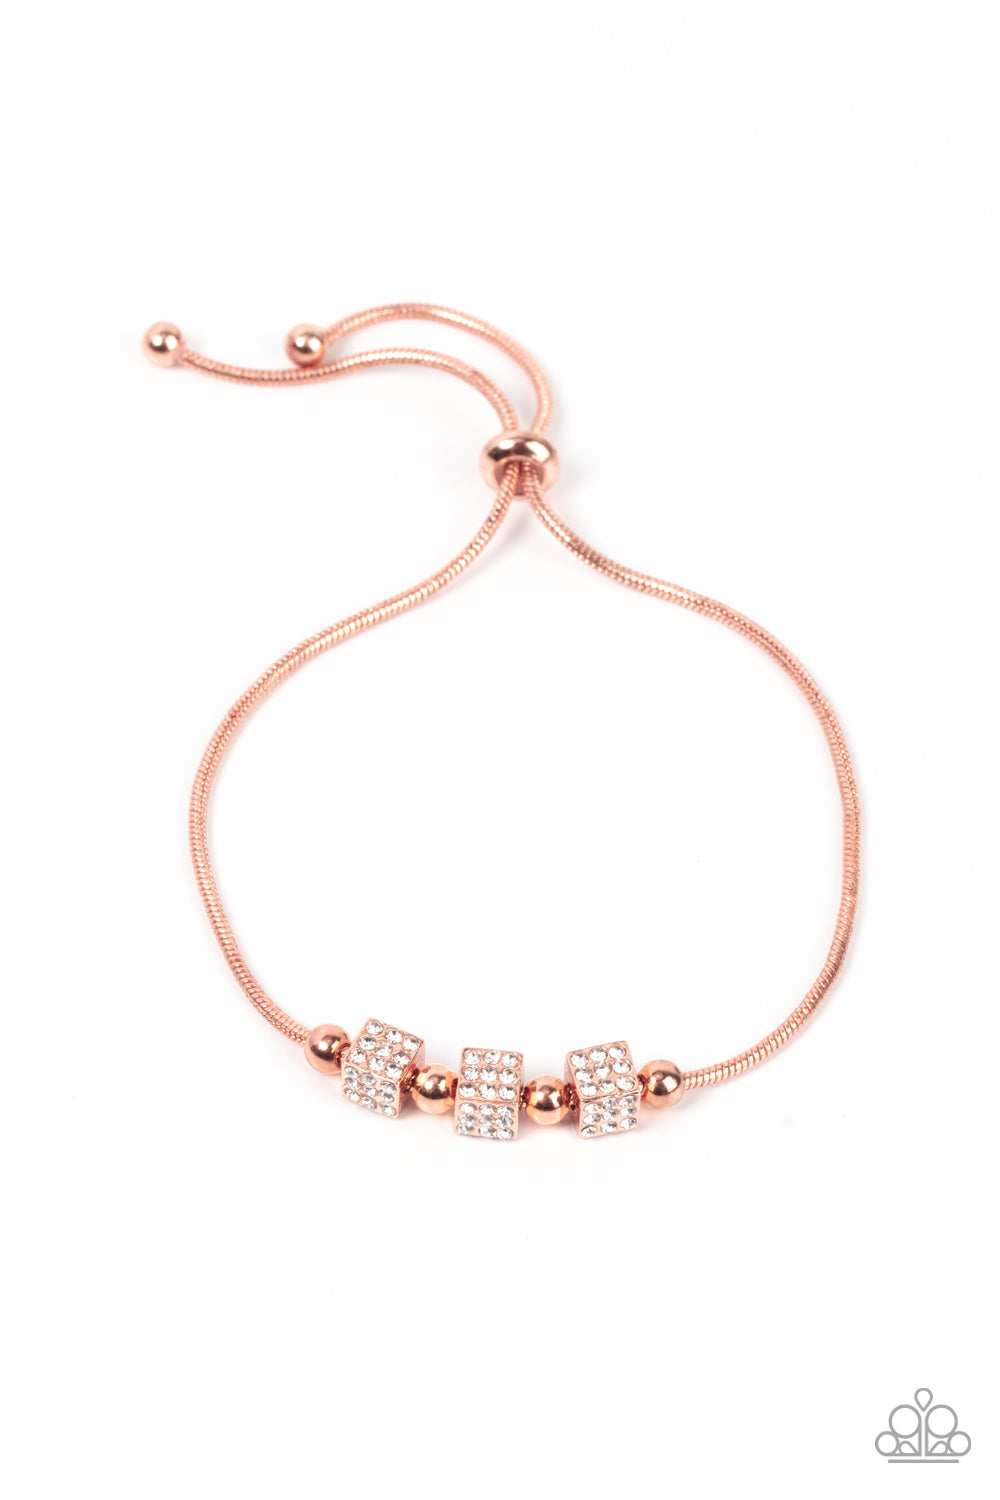 Roll Out the Radiance - Copper - Jewelry - Paparazzi Accessories